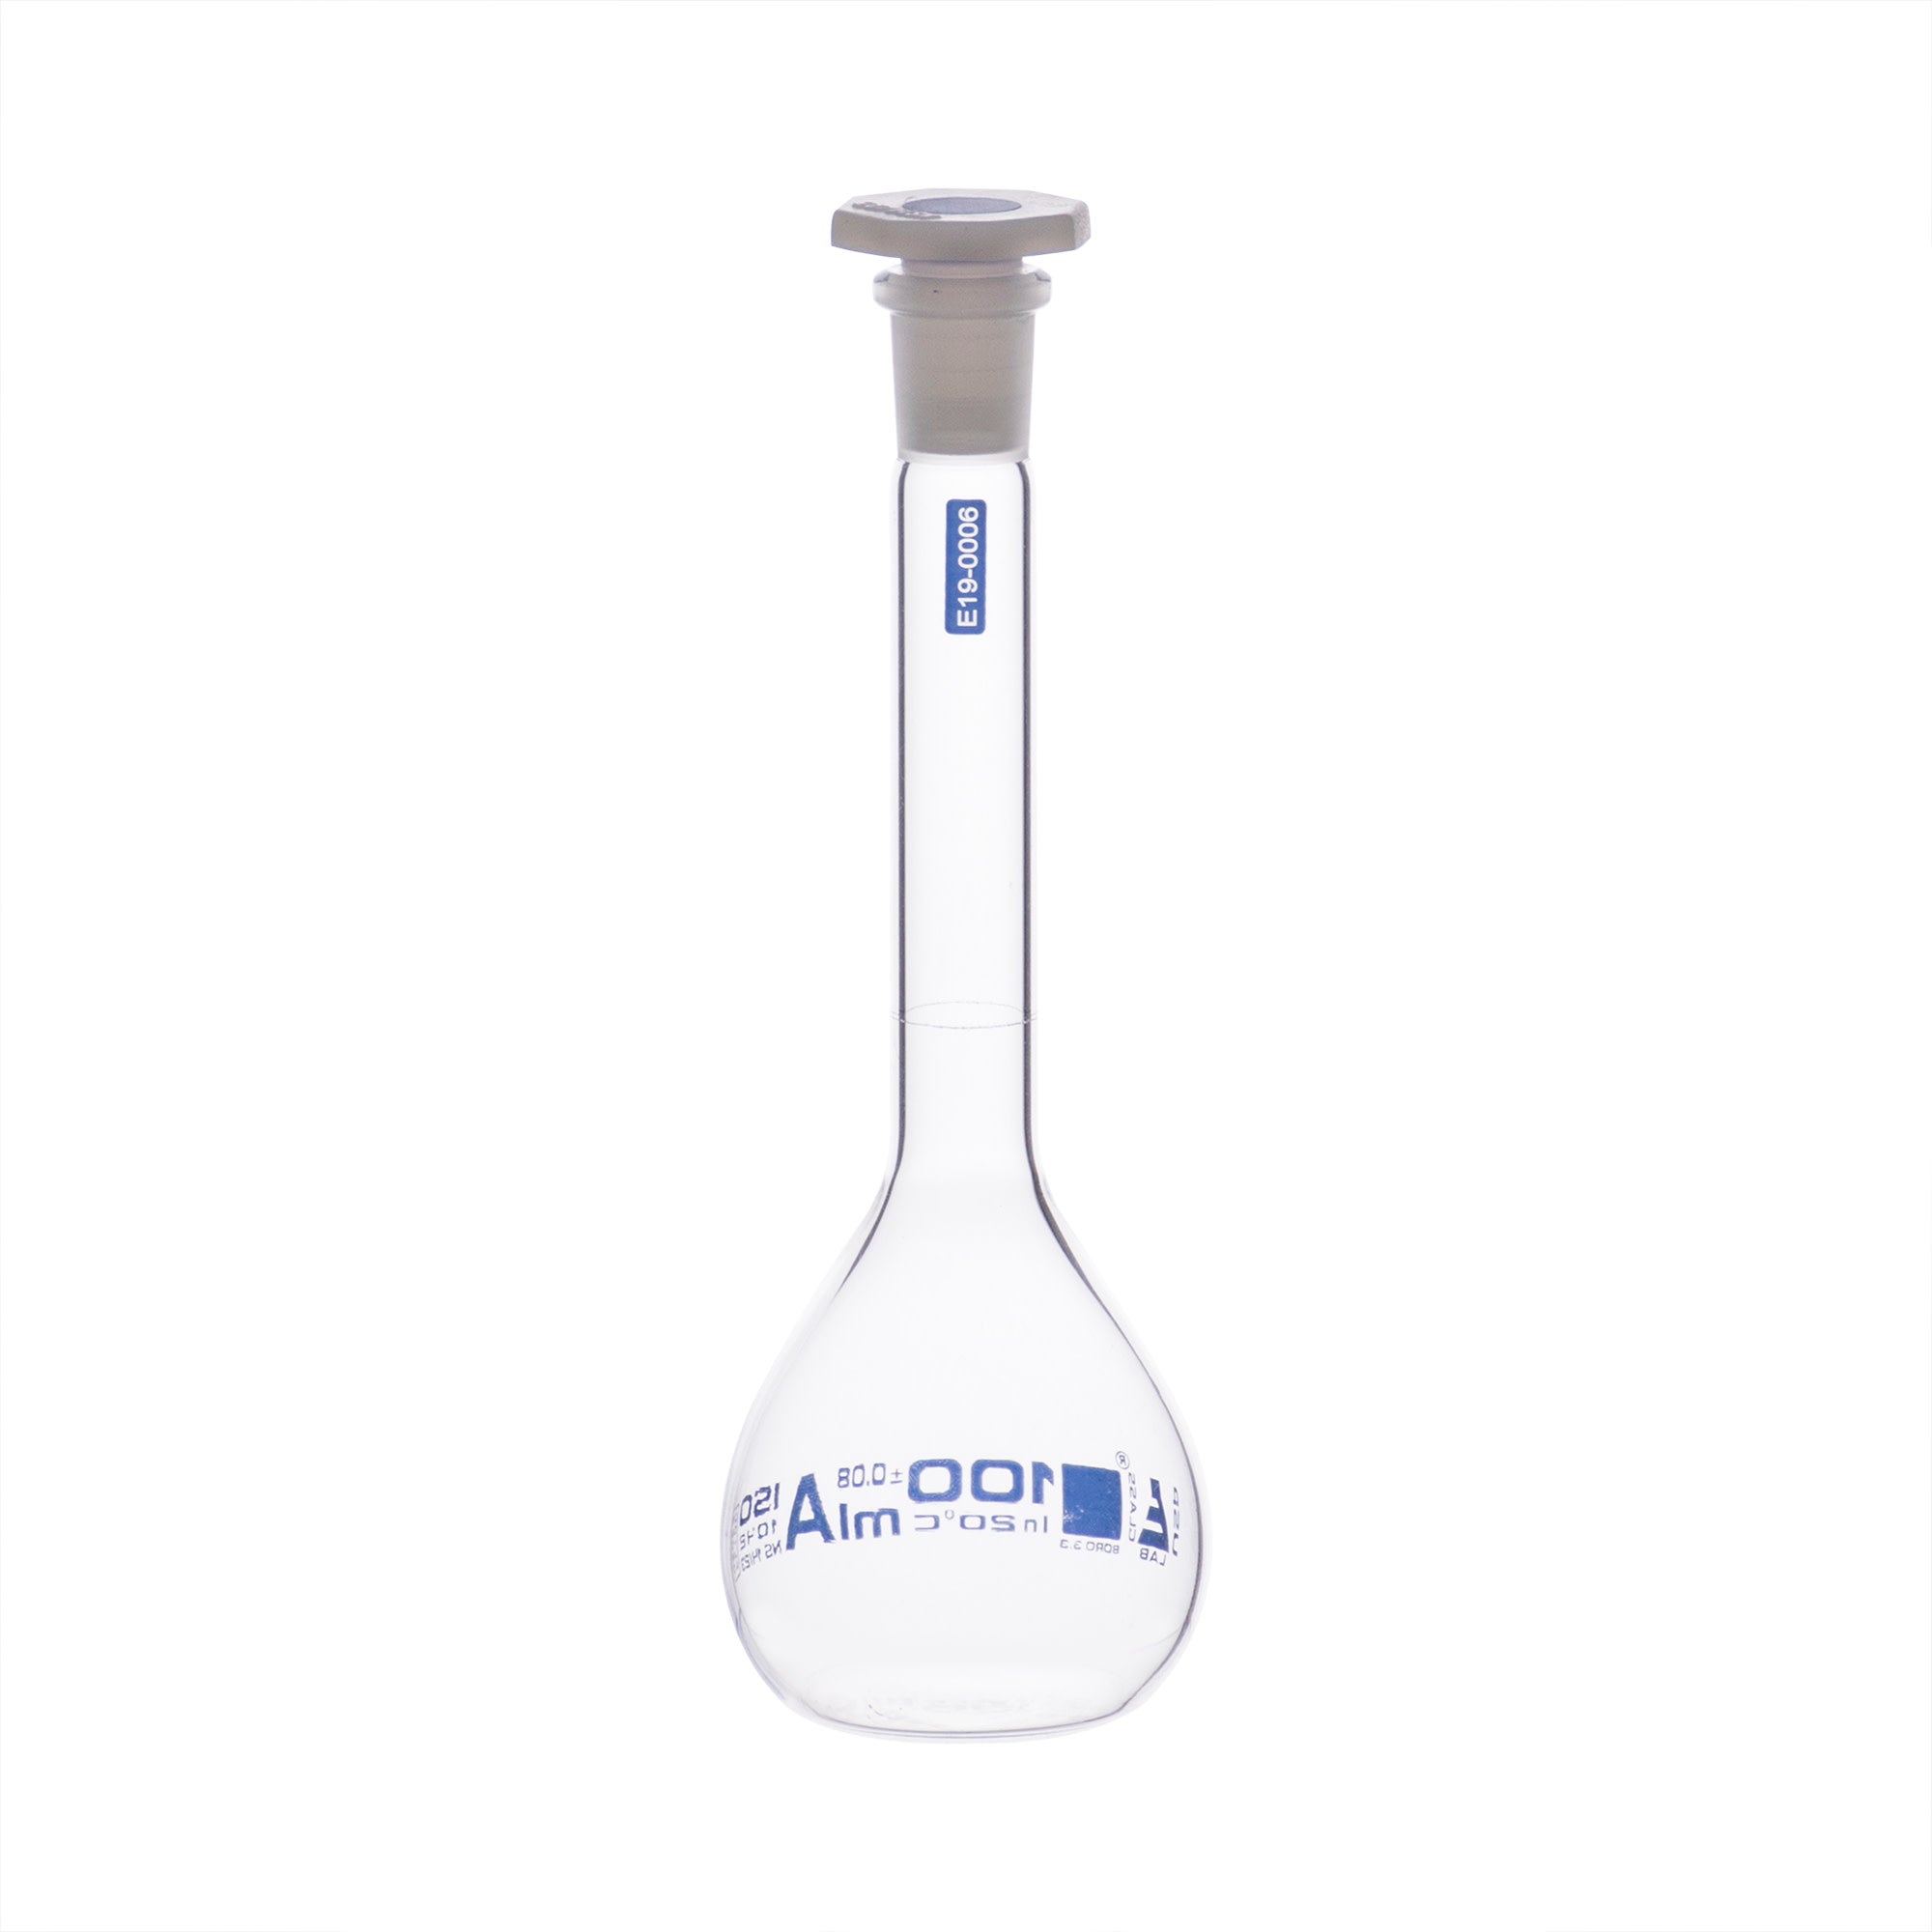 Borosilicate Glass Volumetric Flask with Solid Glass Stopper, 100 ml, USP Class A with Individual Work Certificate,  Pack of 2, Autoclavable